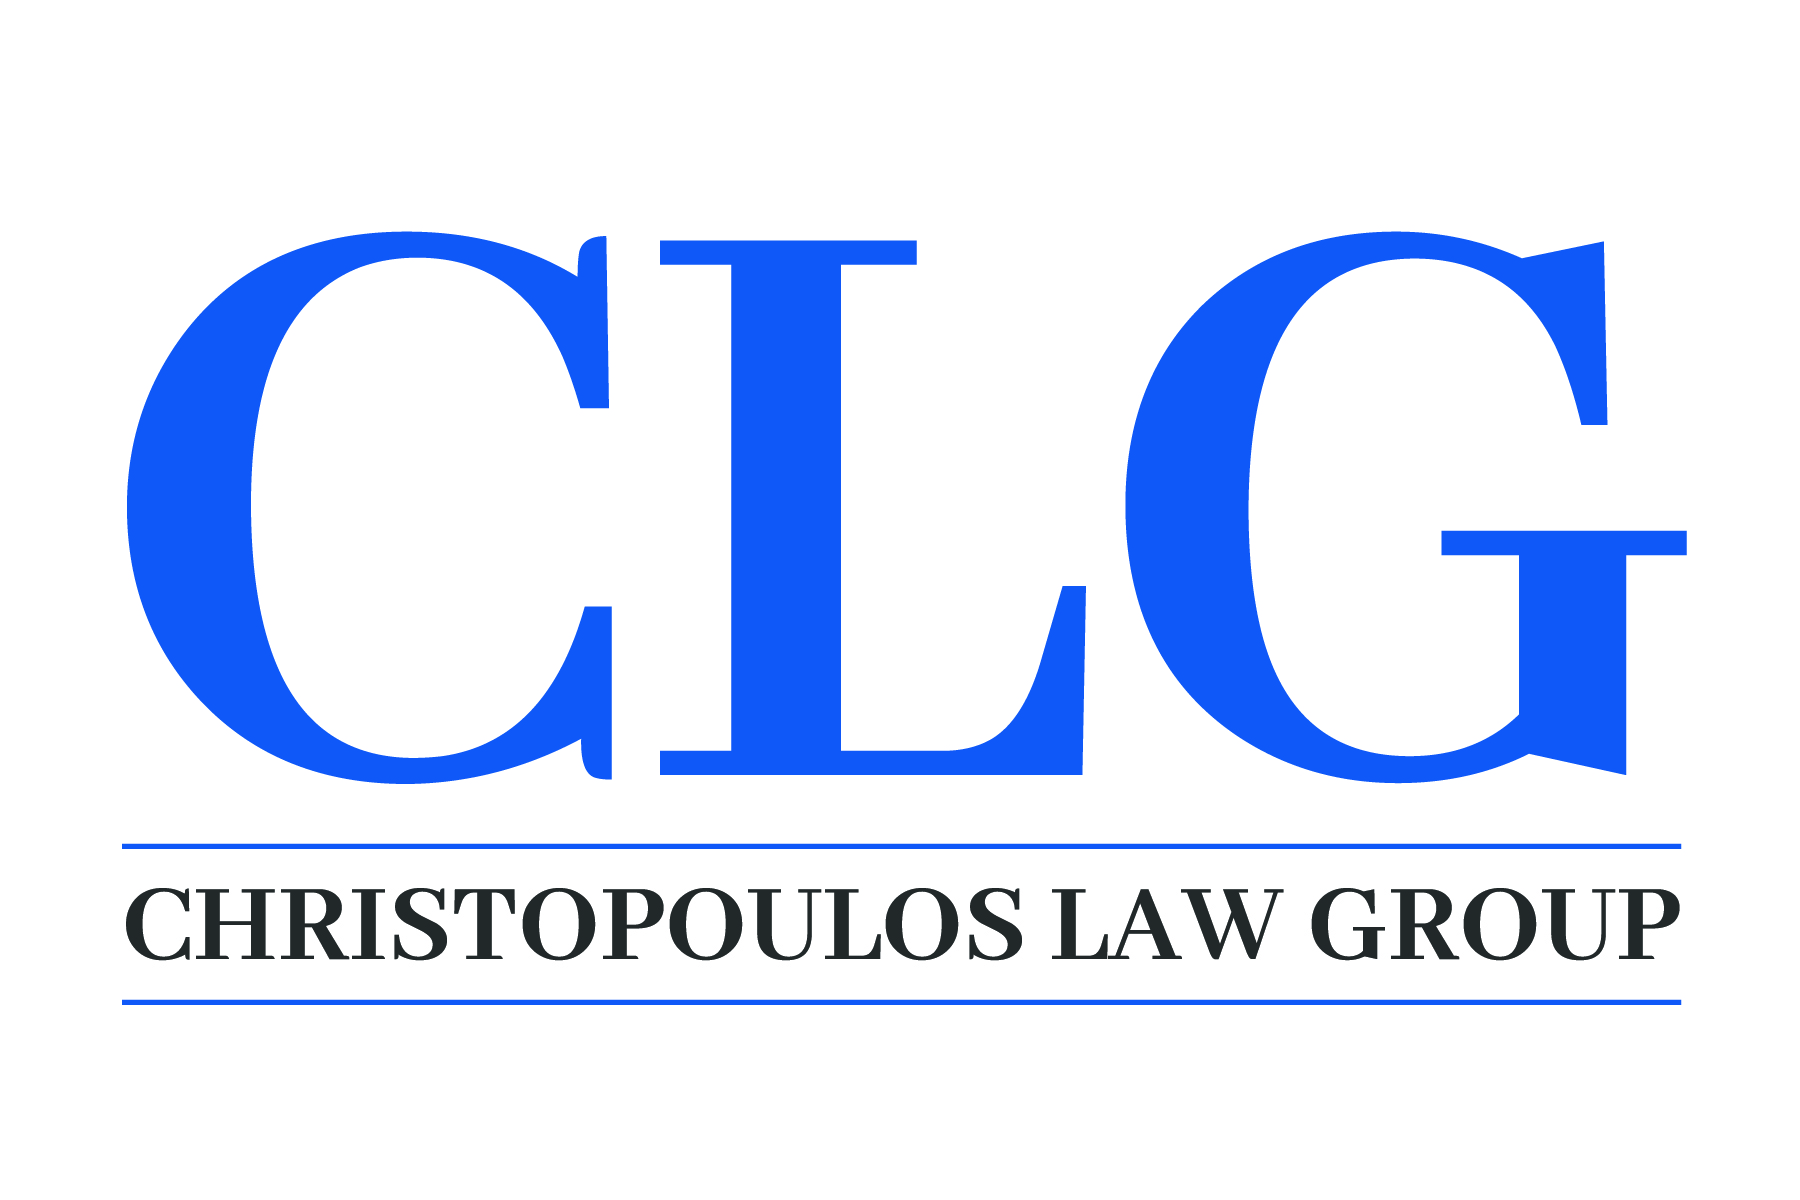 Christopoulos Law Group, LLC